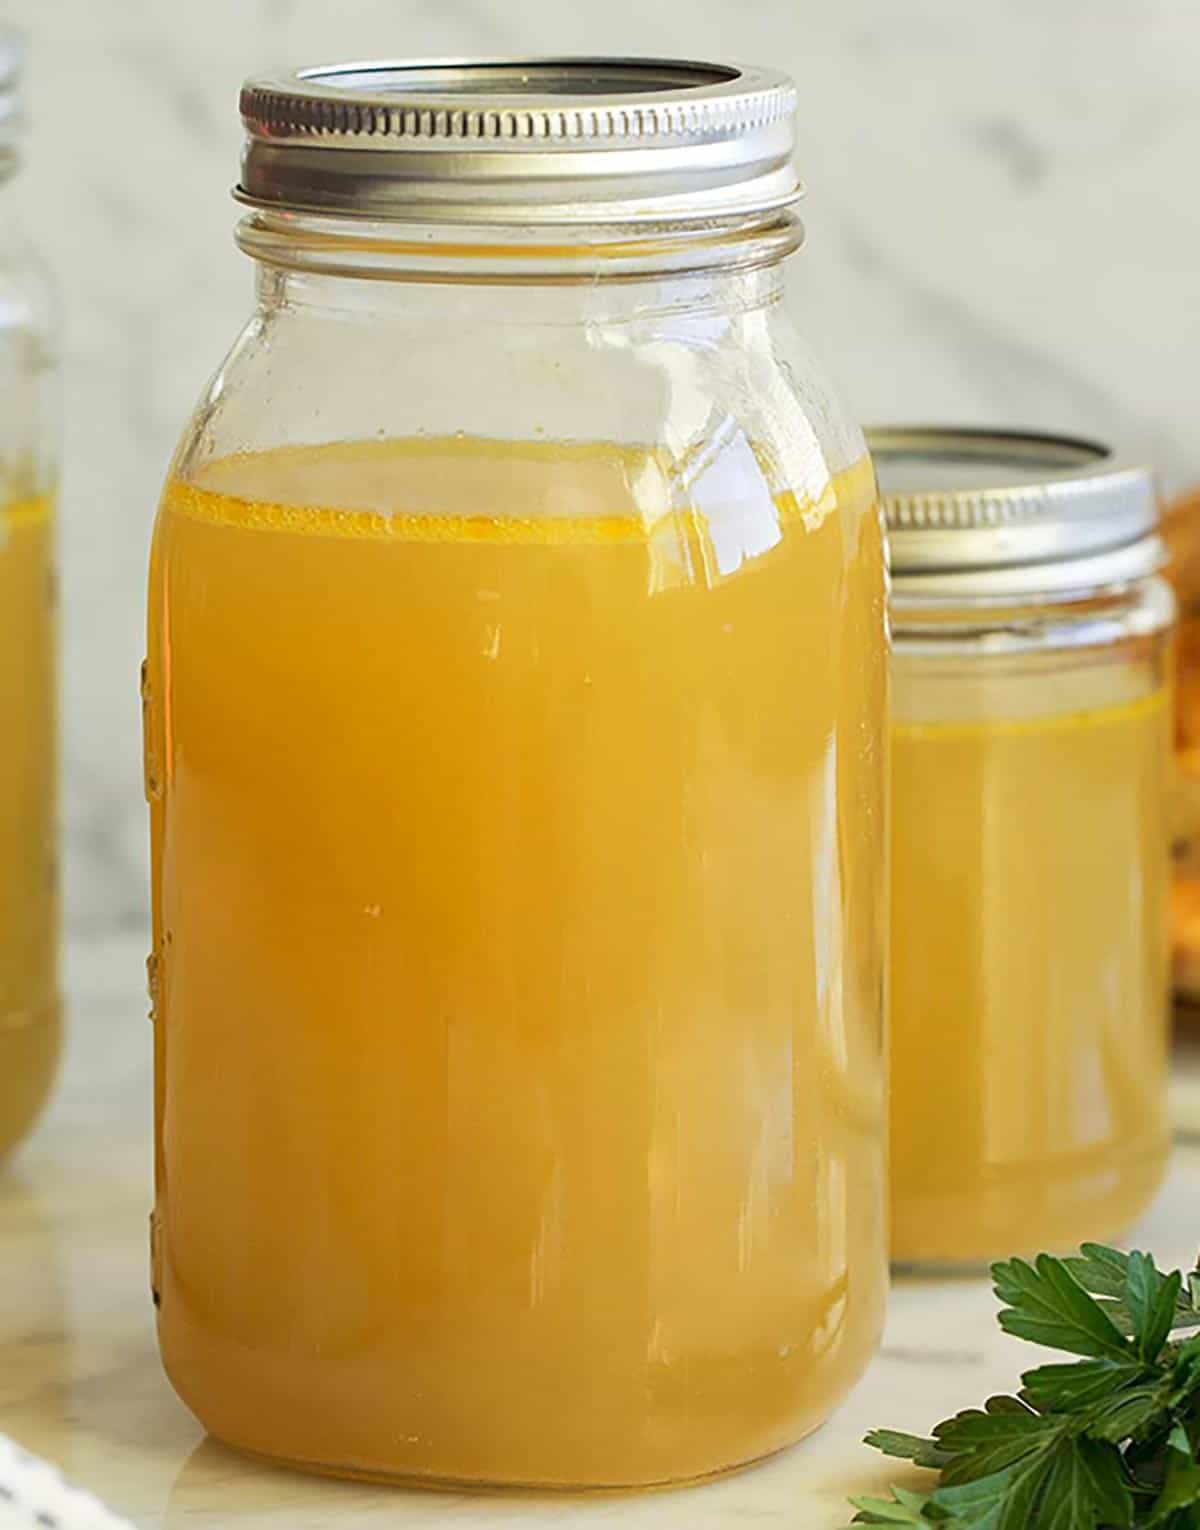 chicken stock concentrate in a jar